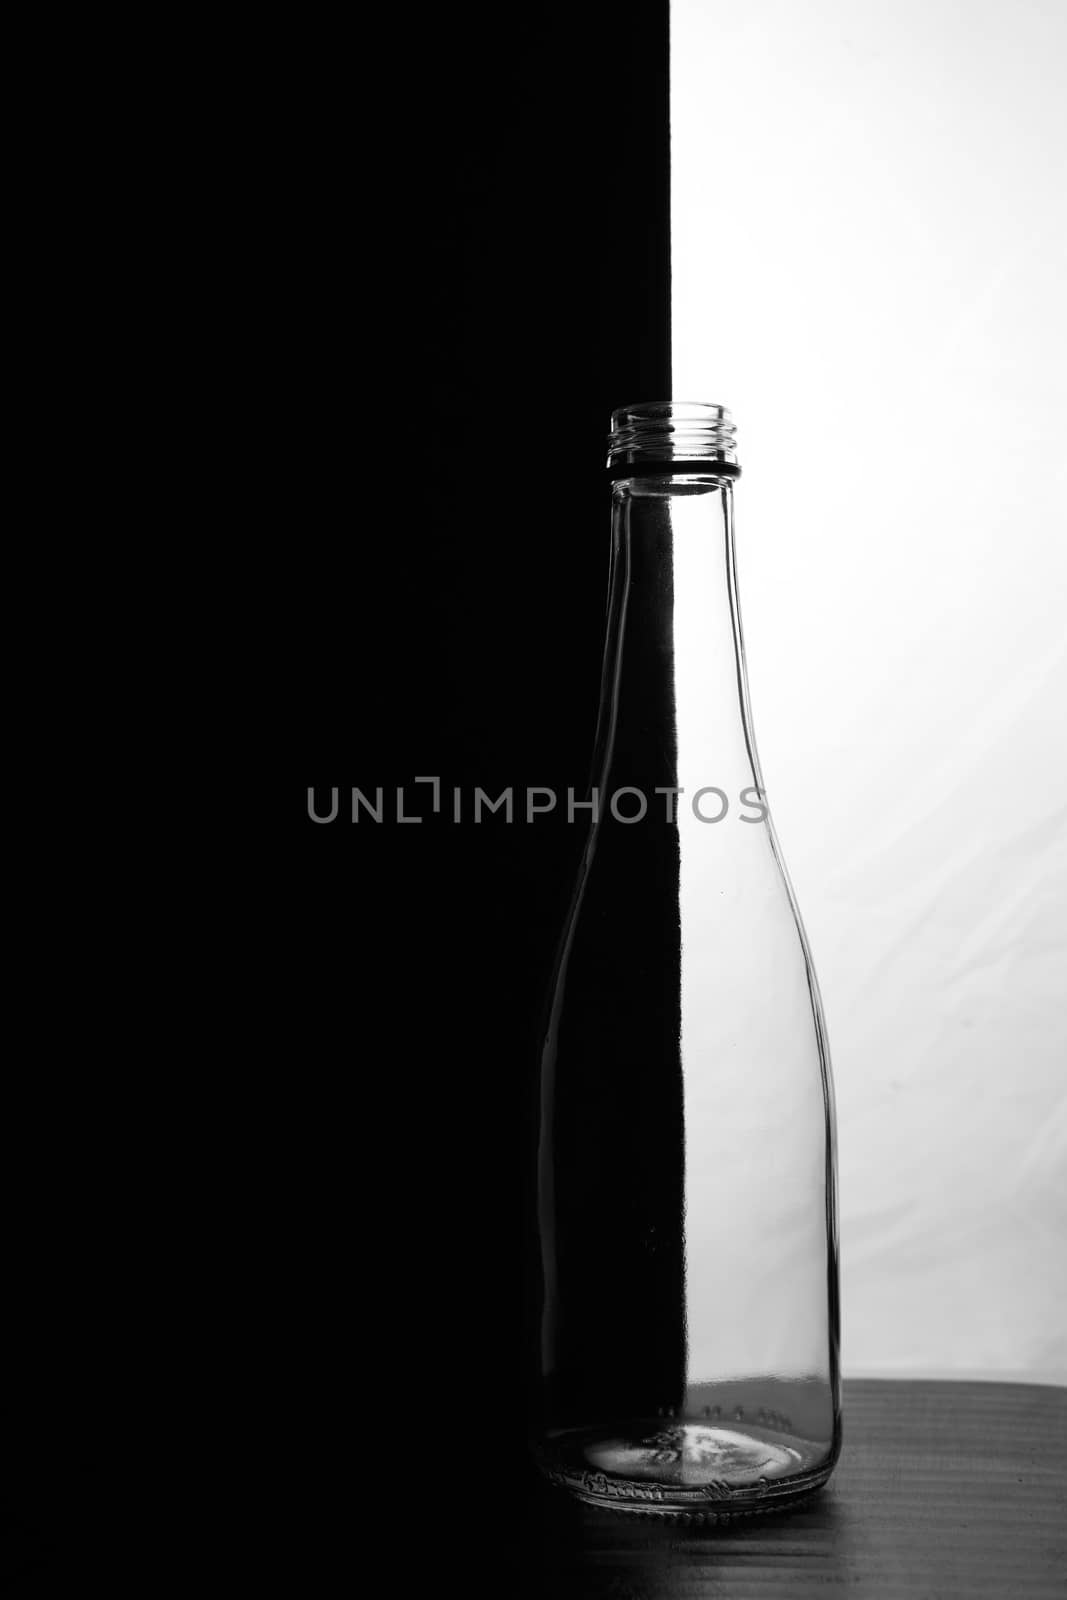 A small bottle on a black and white background. Half black and half white. High quality photo